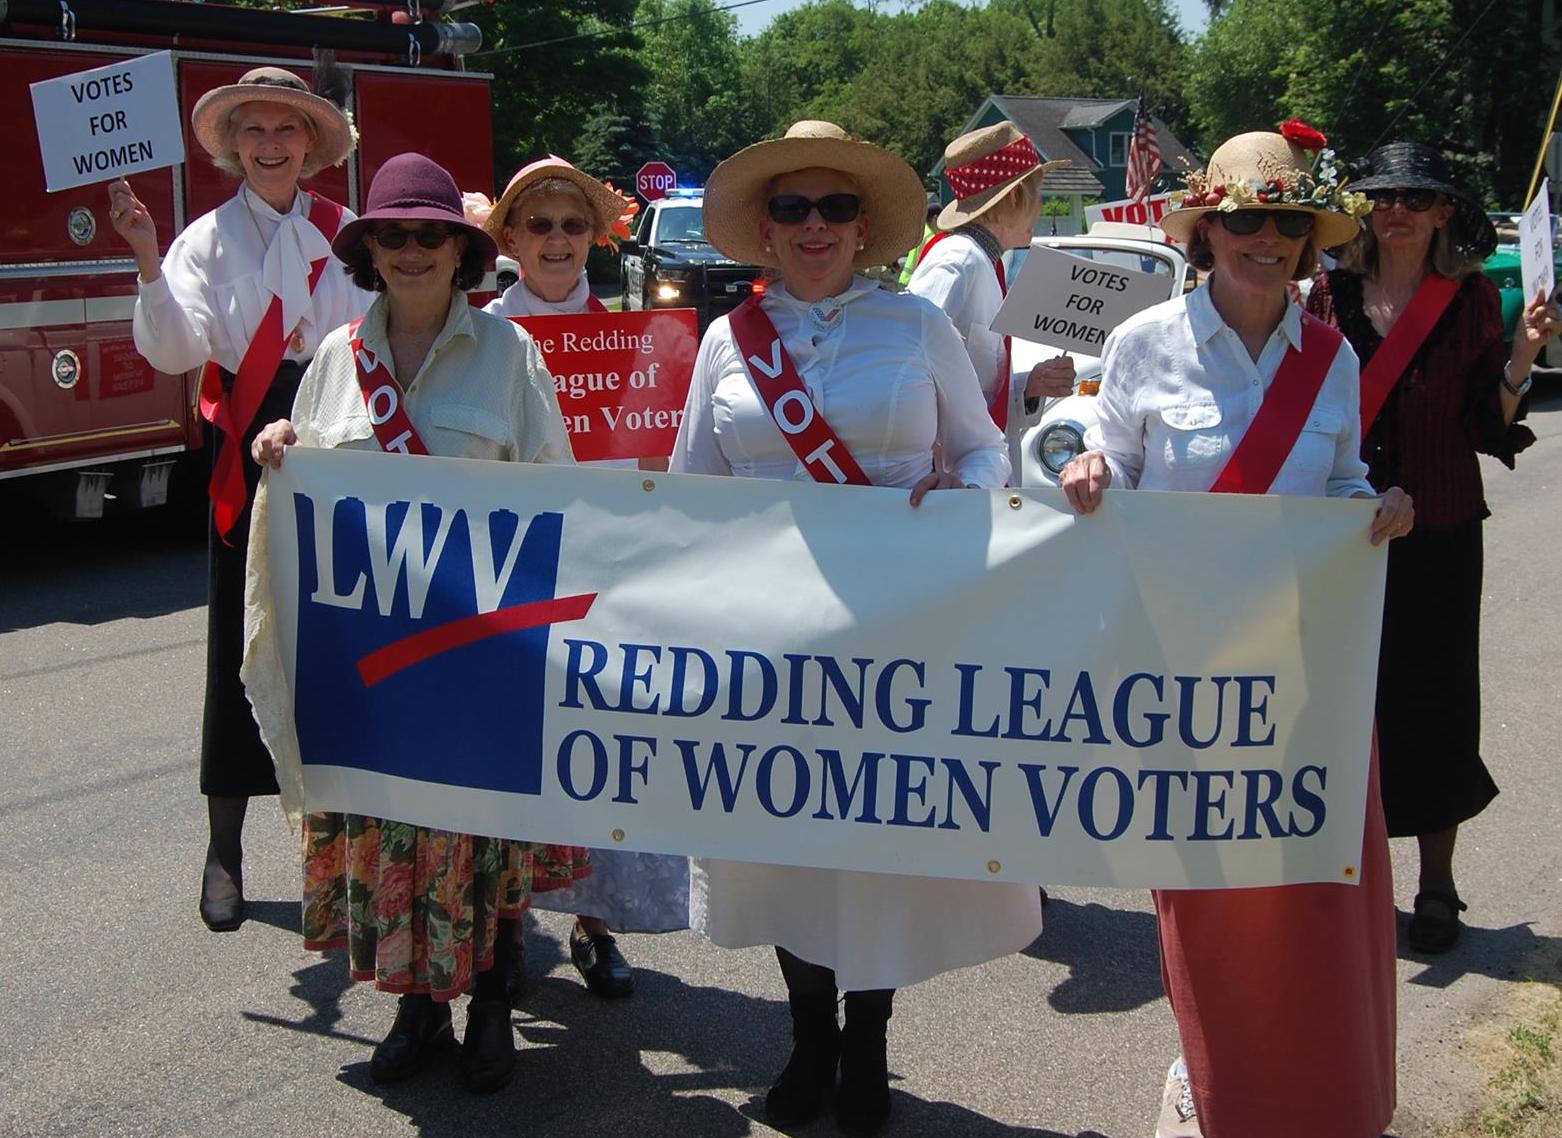 Members of the Redding League of Women Voters